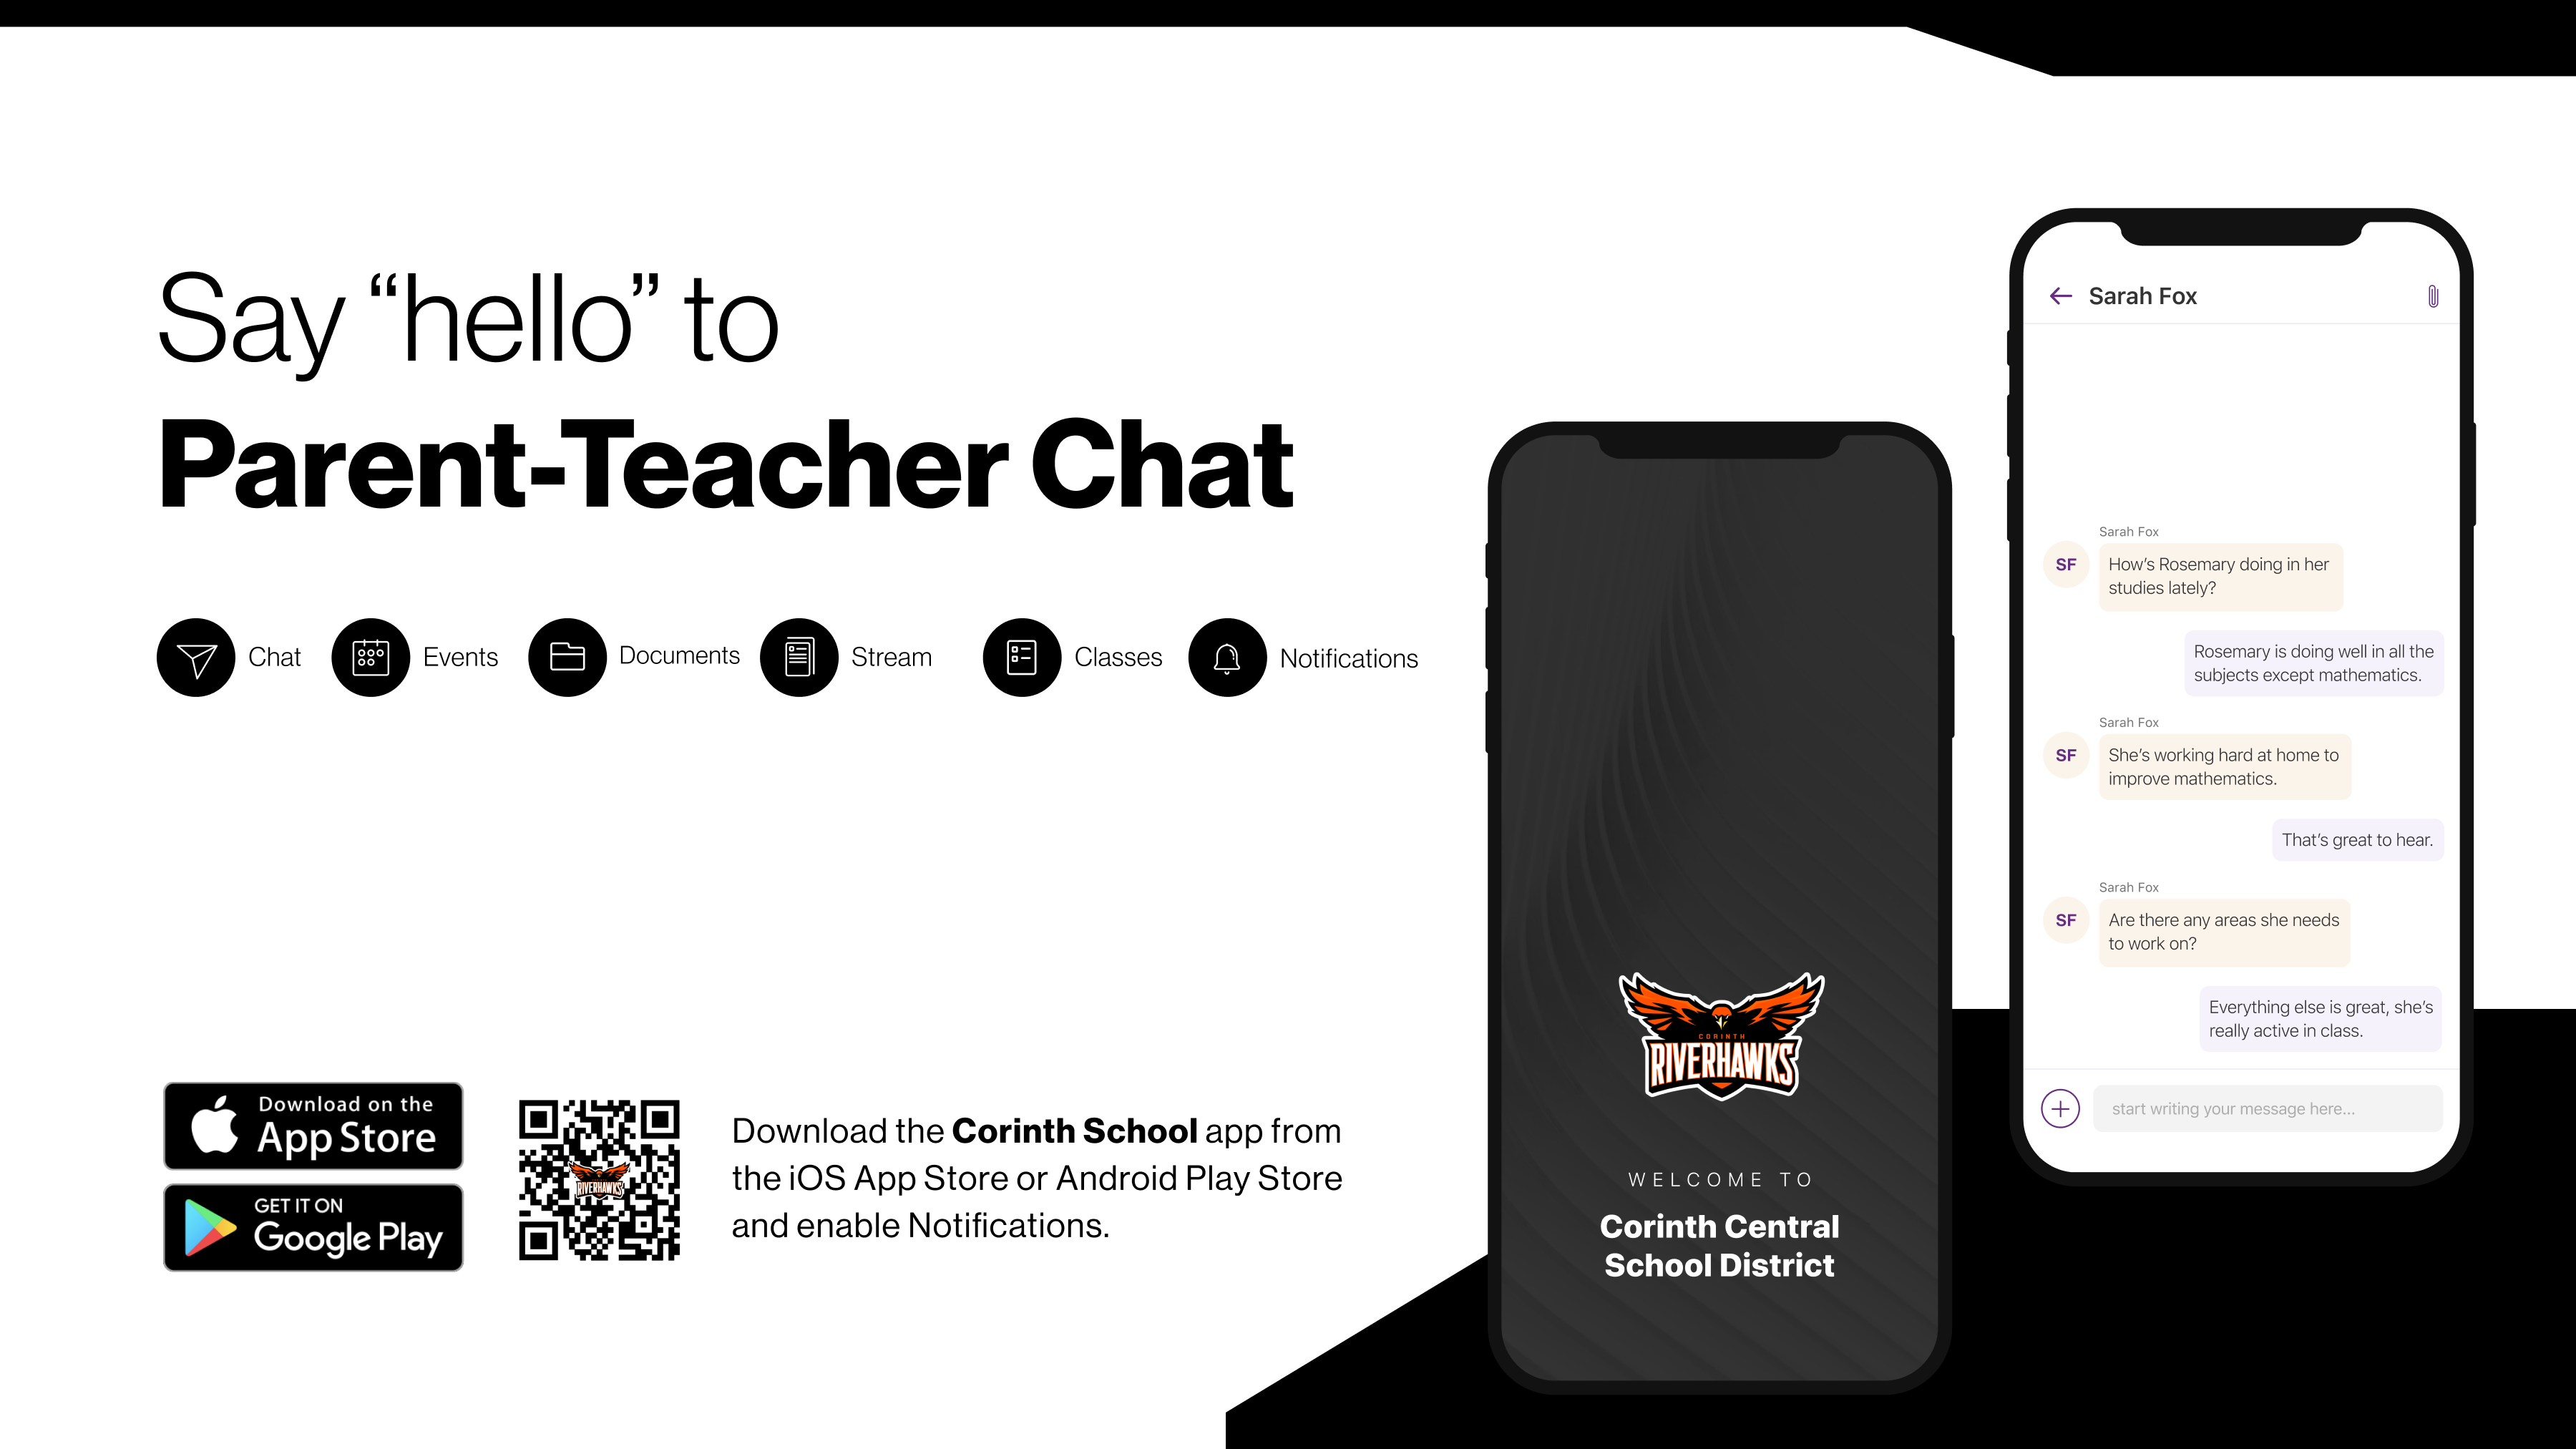 Say "hello" to Parent-Teacher Chat. Download the Corinth School app from the iOS App Store or Android Play Store and enable Notifications.